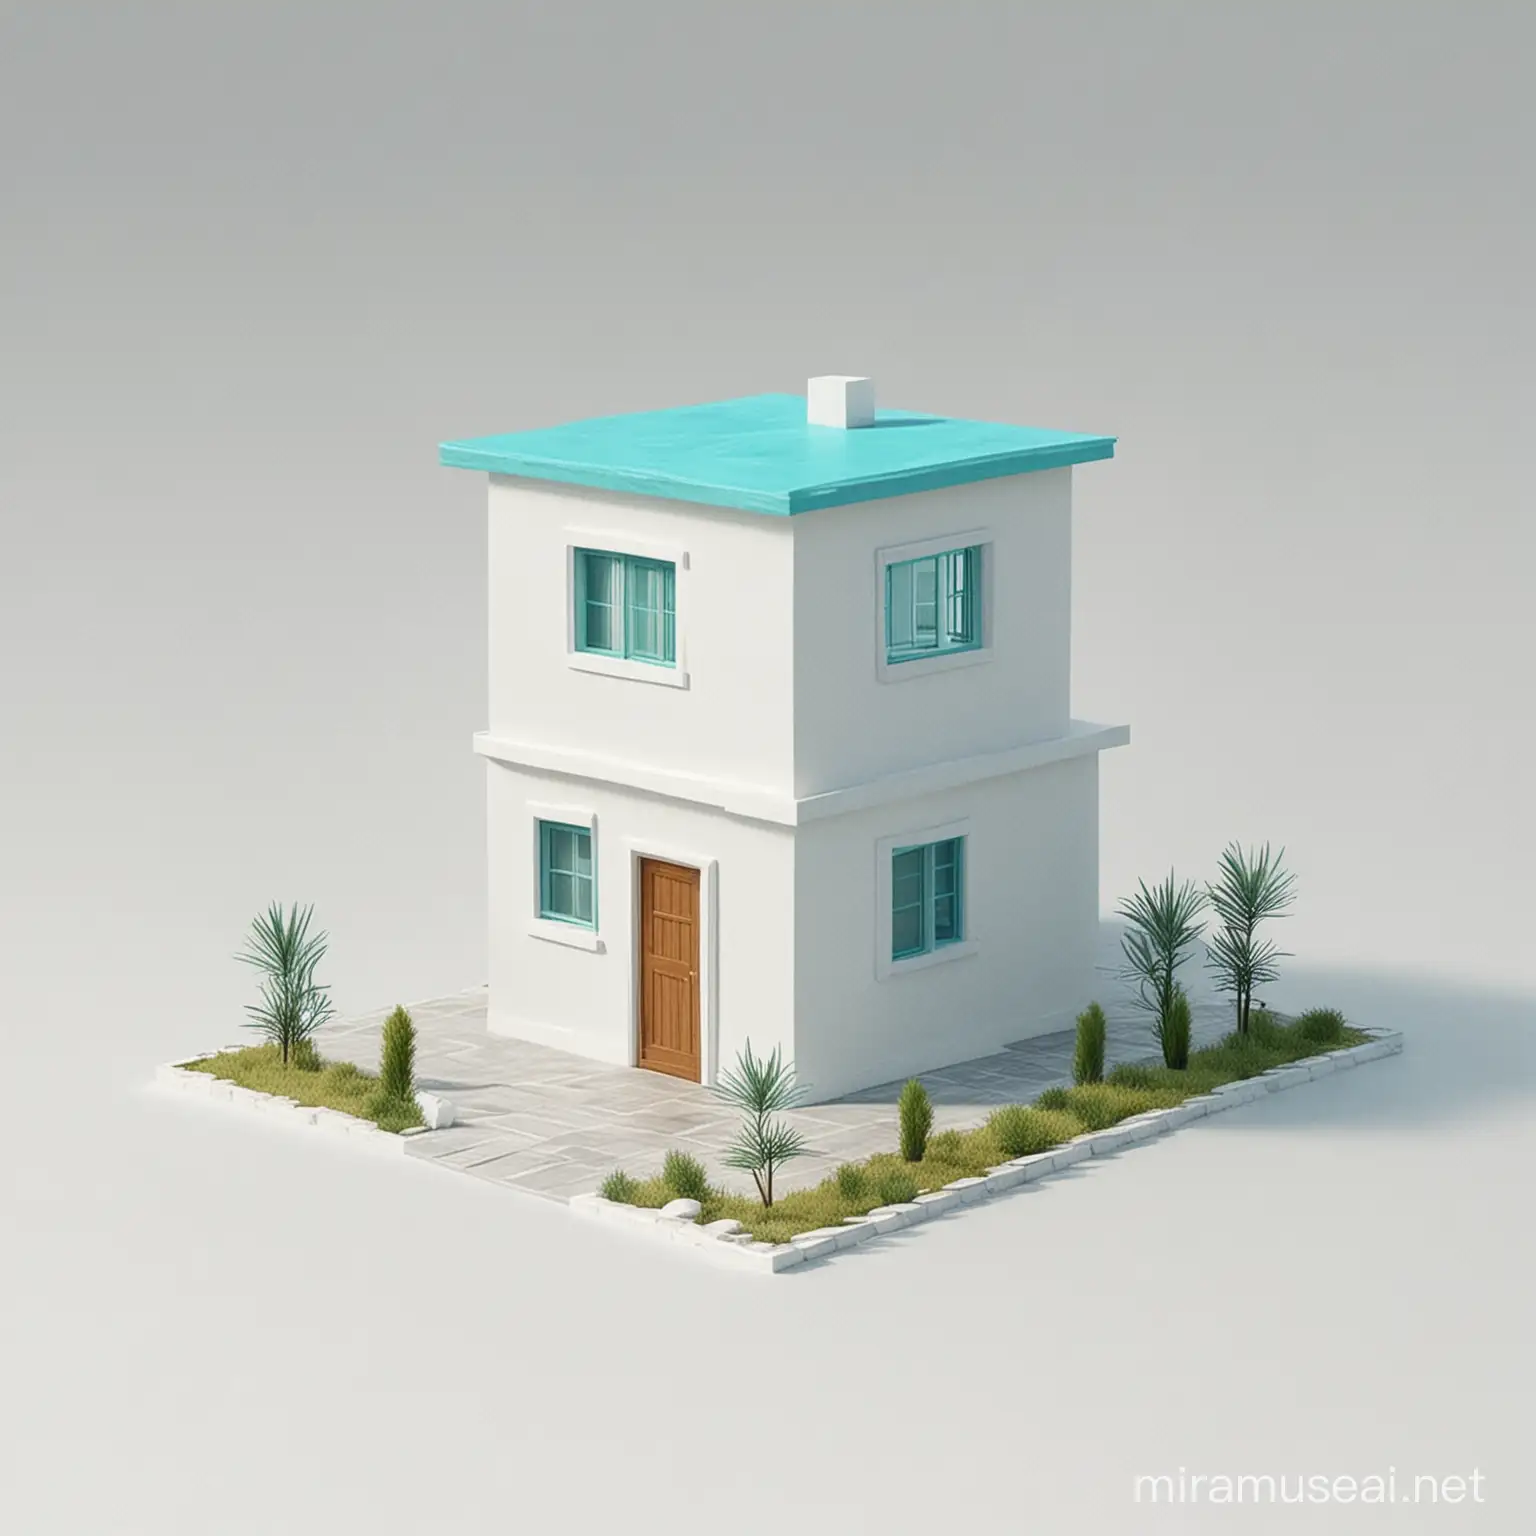 3D Animated Square Turquoise House on White Background